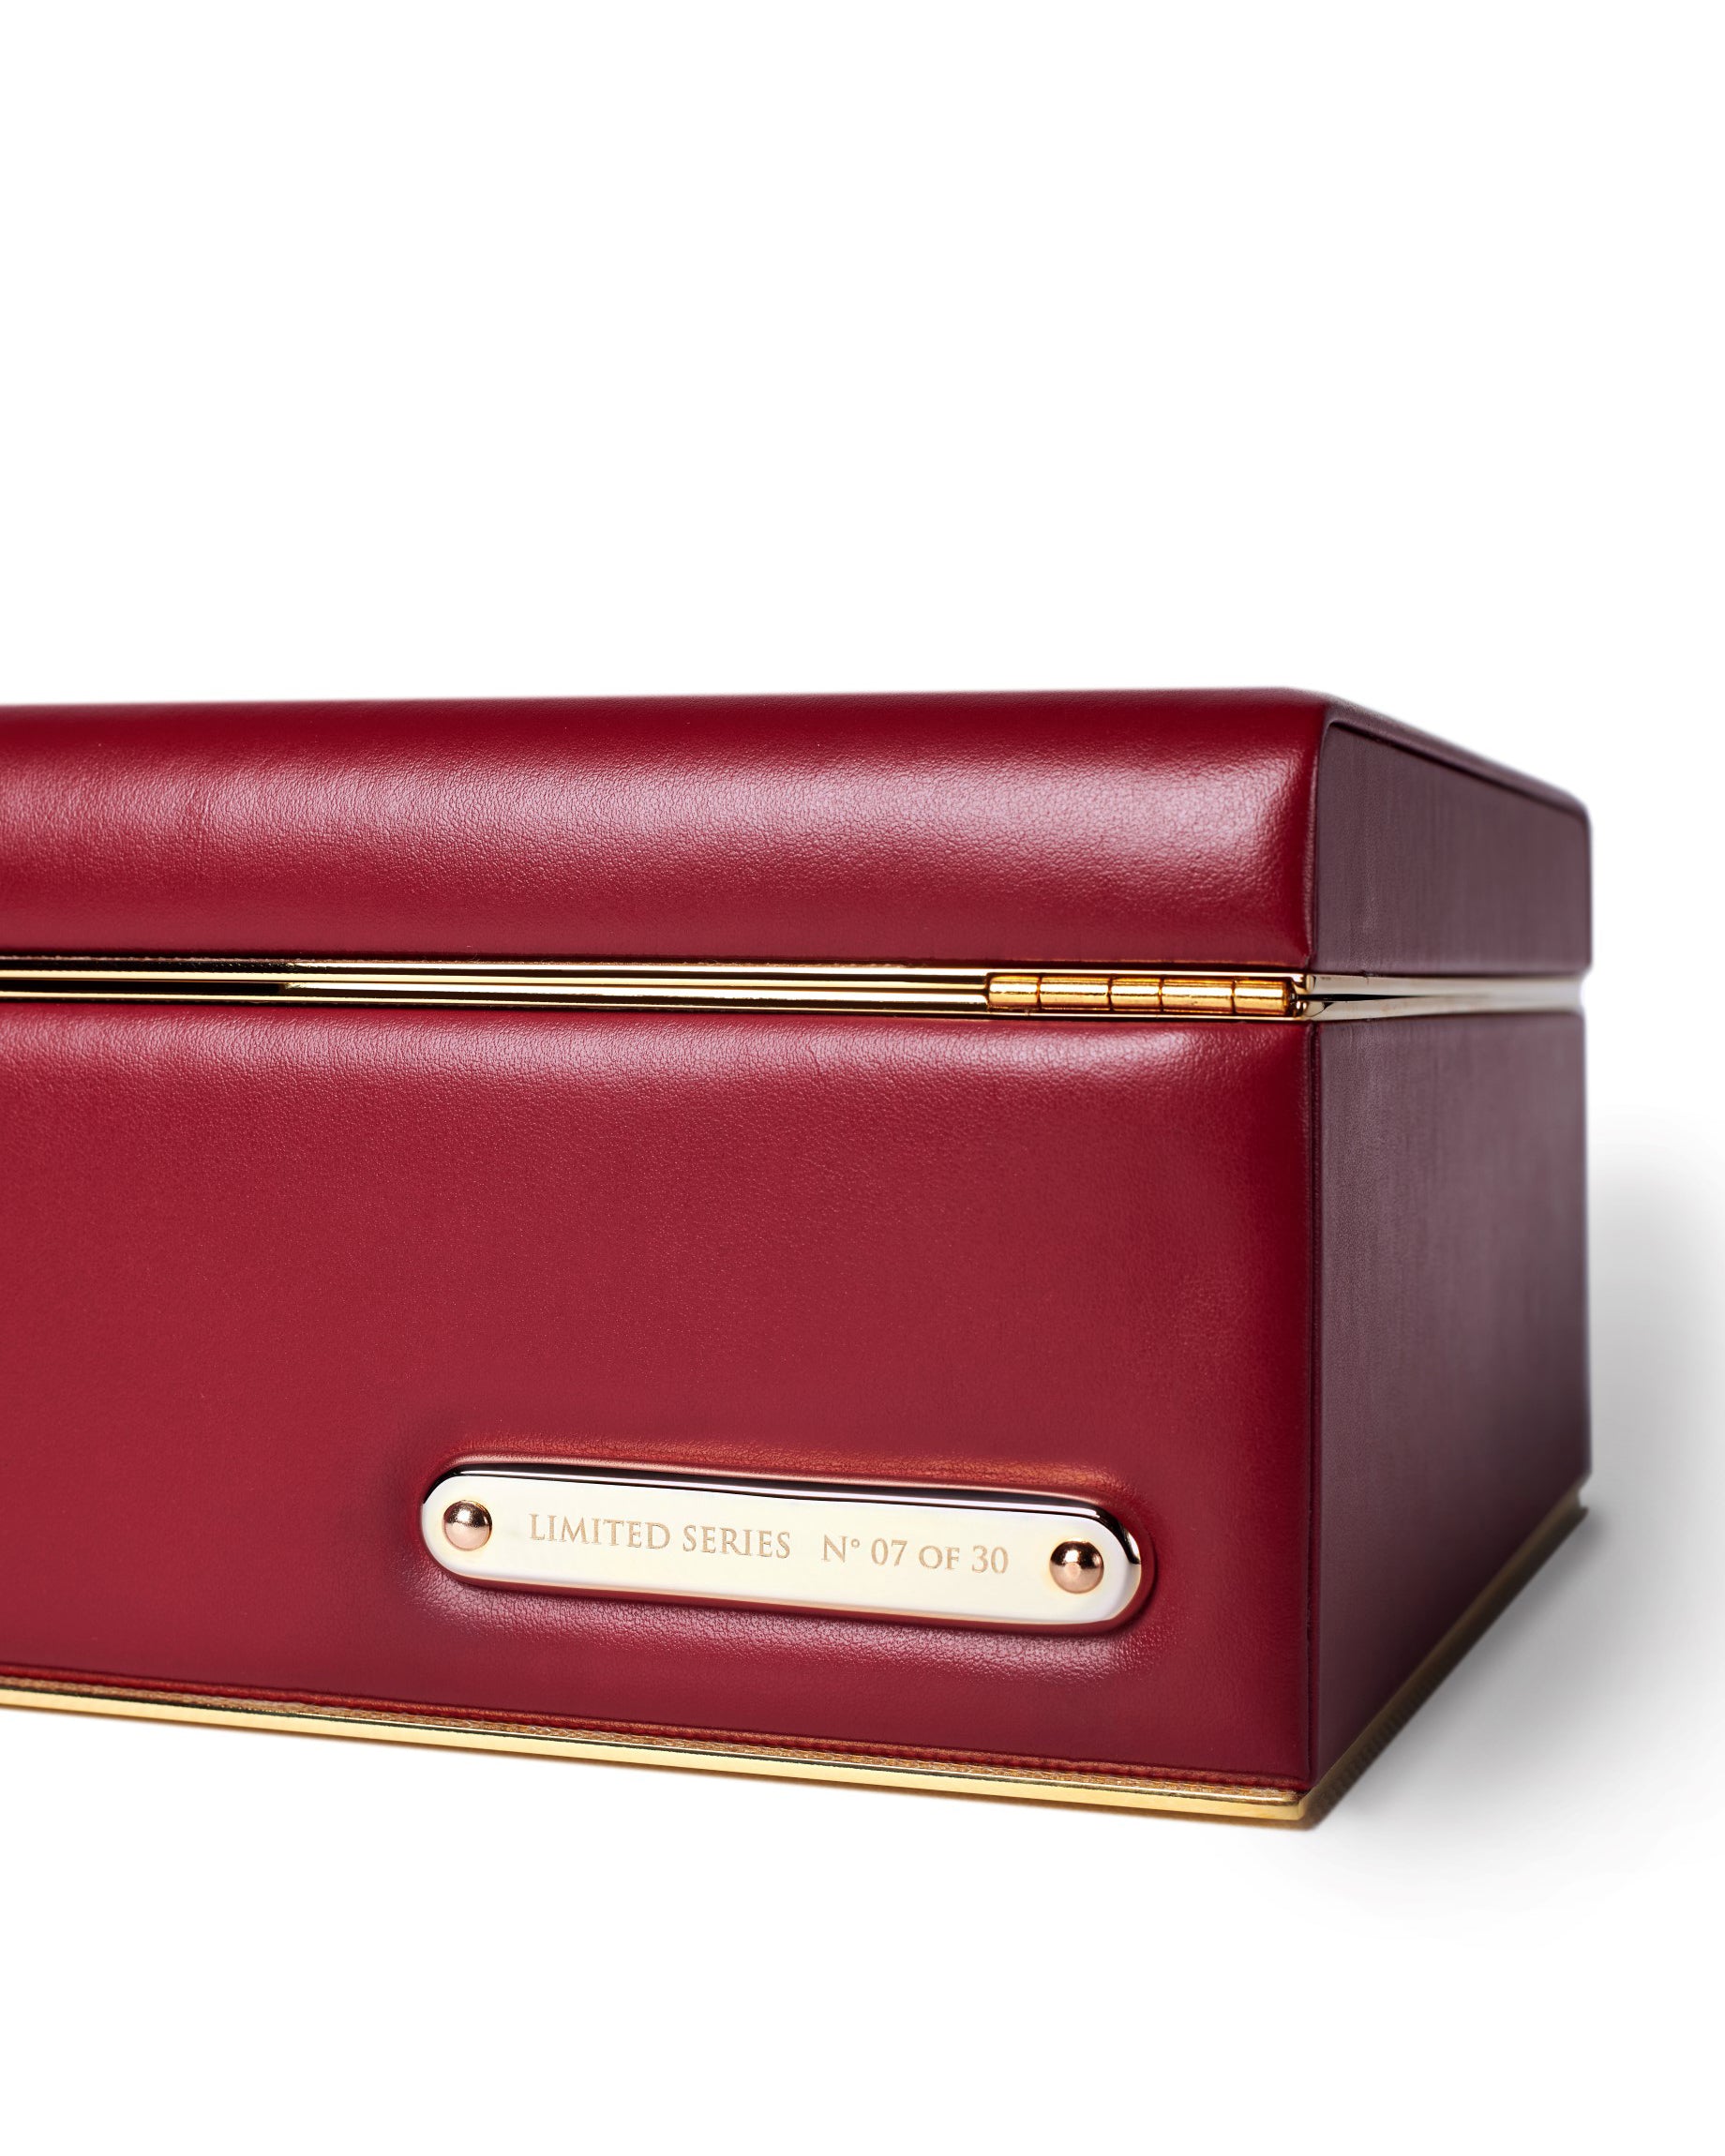 Bernardini Milano jewellery holder in red leather, yellow gold plated - limited series target detail 